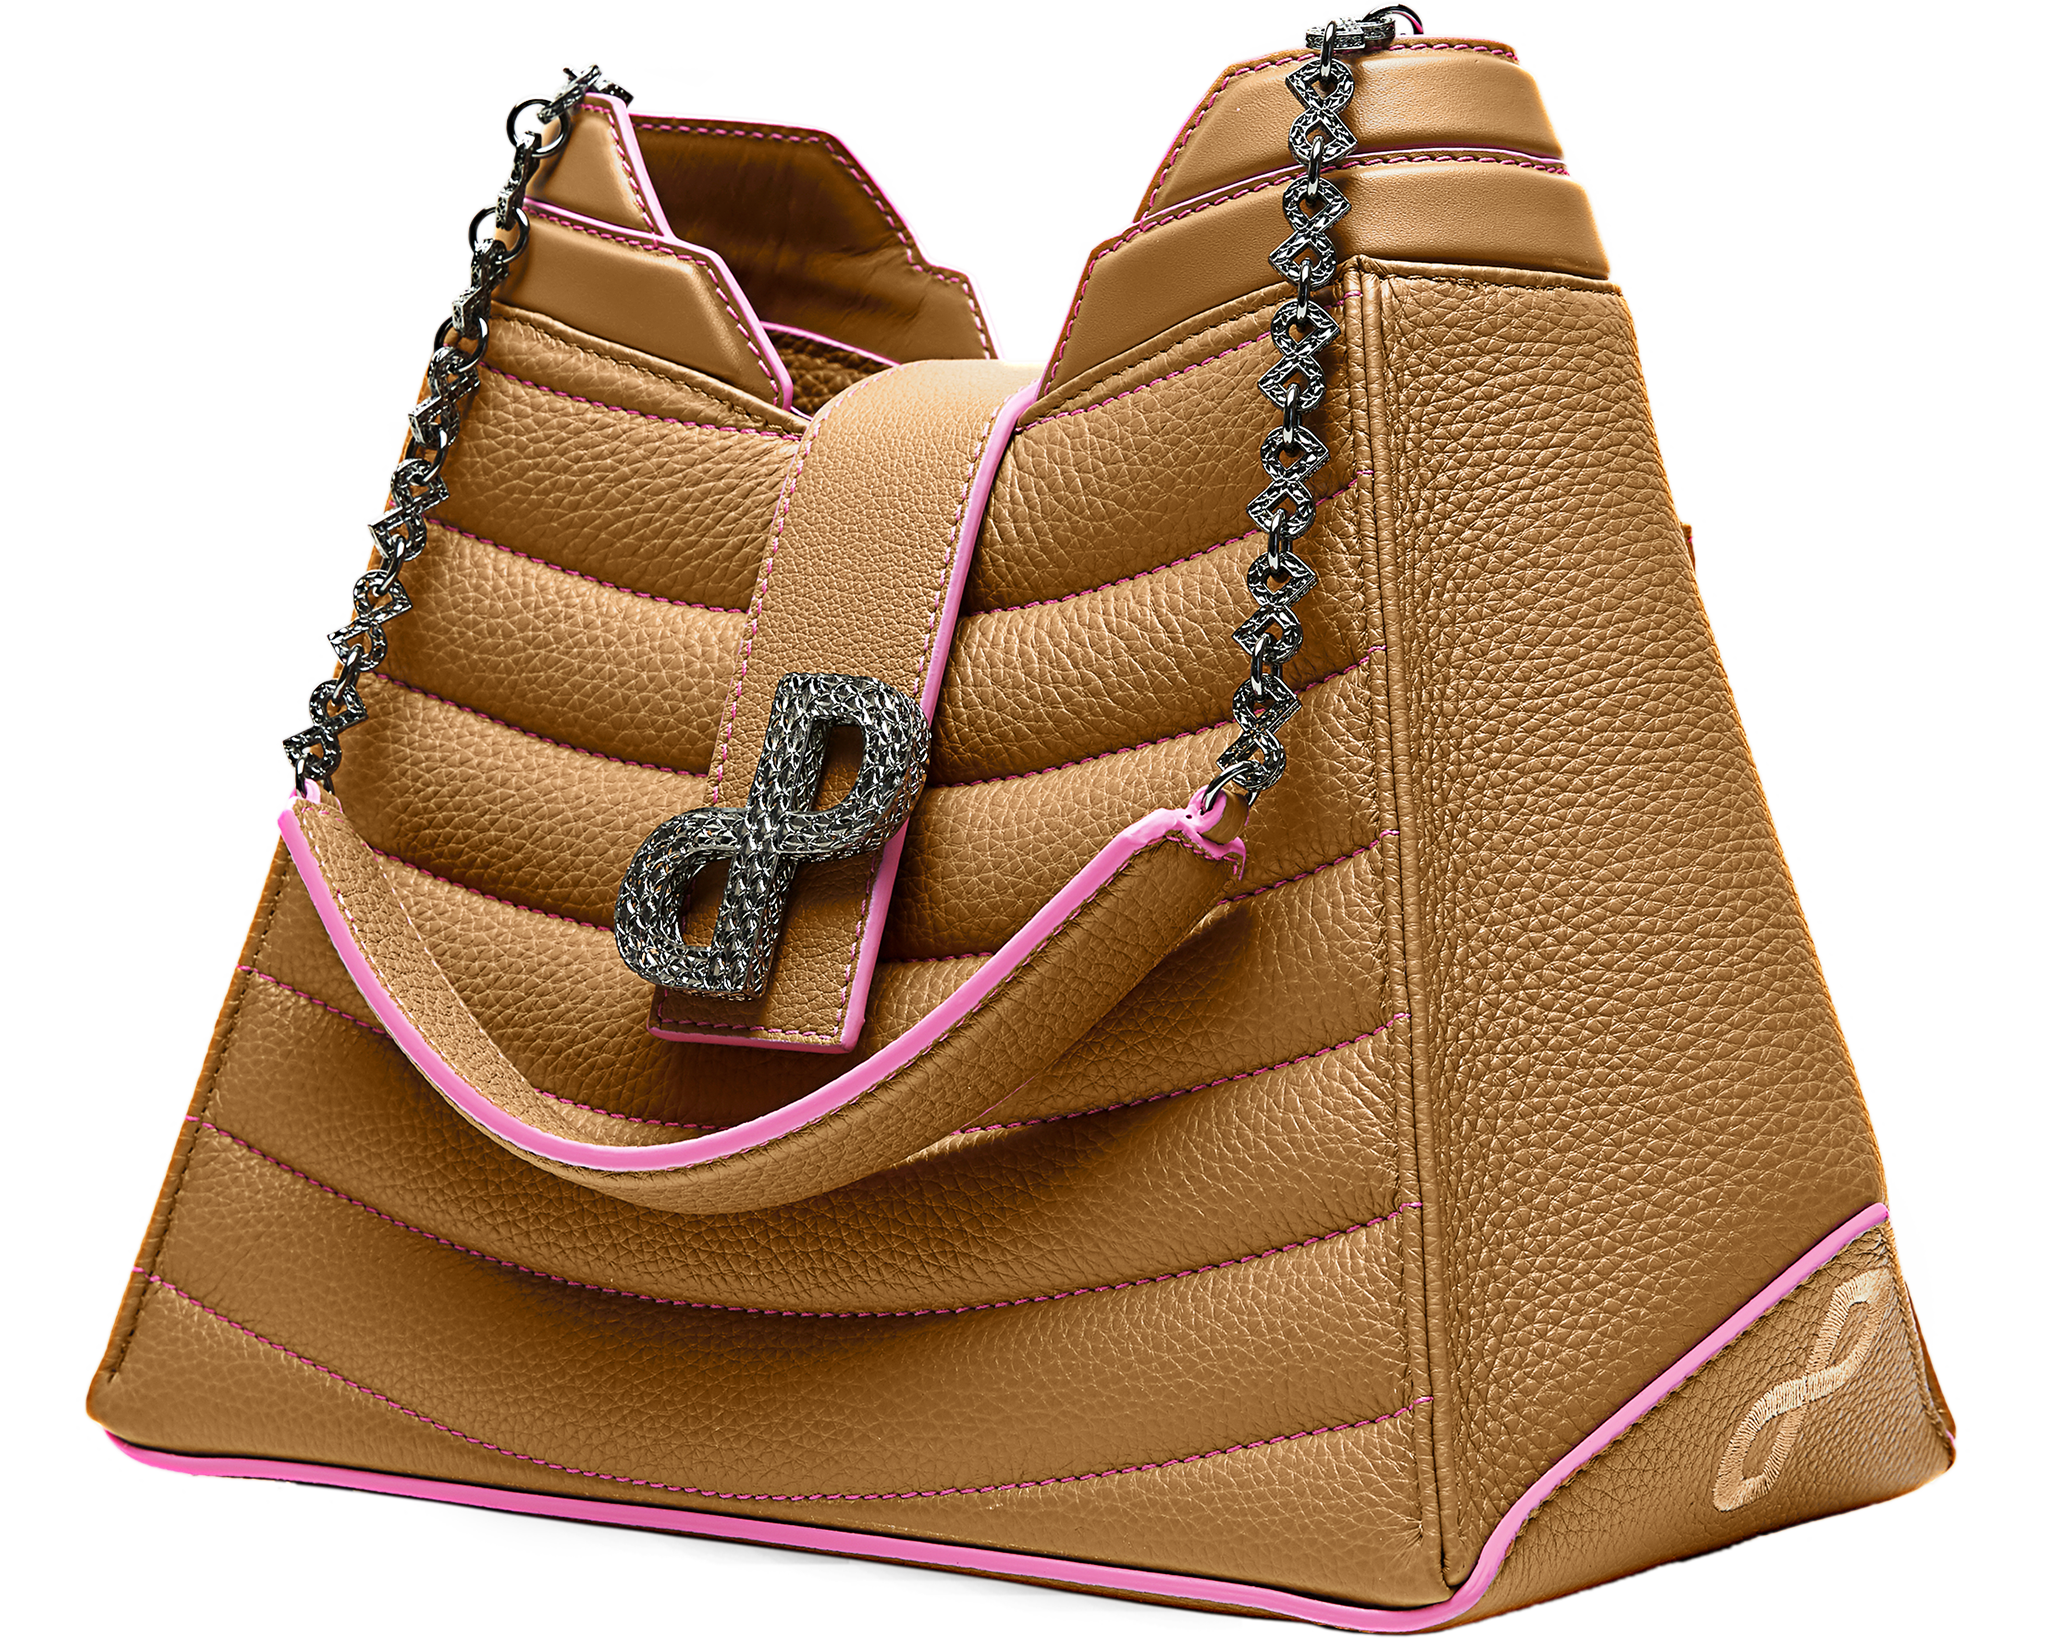 An unprecedented tote bag in 3D hardware-A regal statement piece-All MADE IN ITALY  